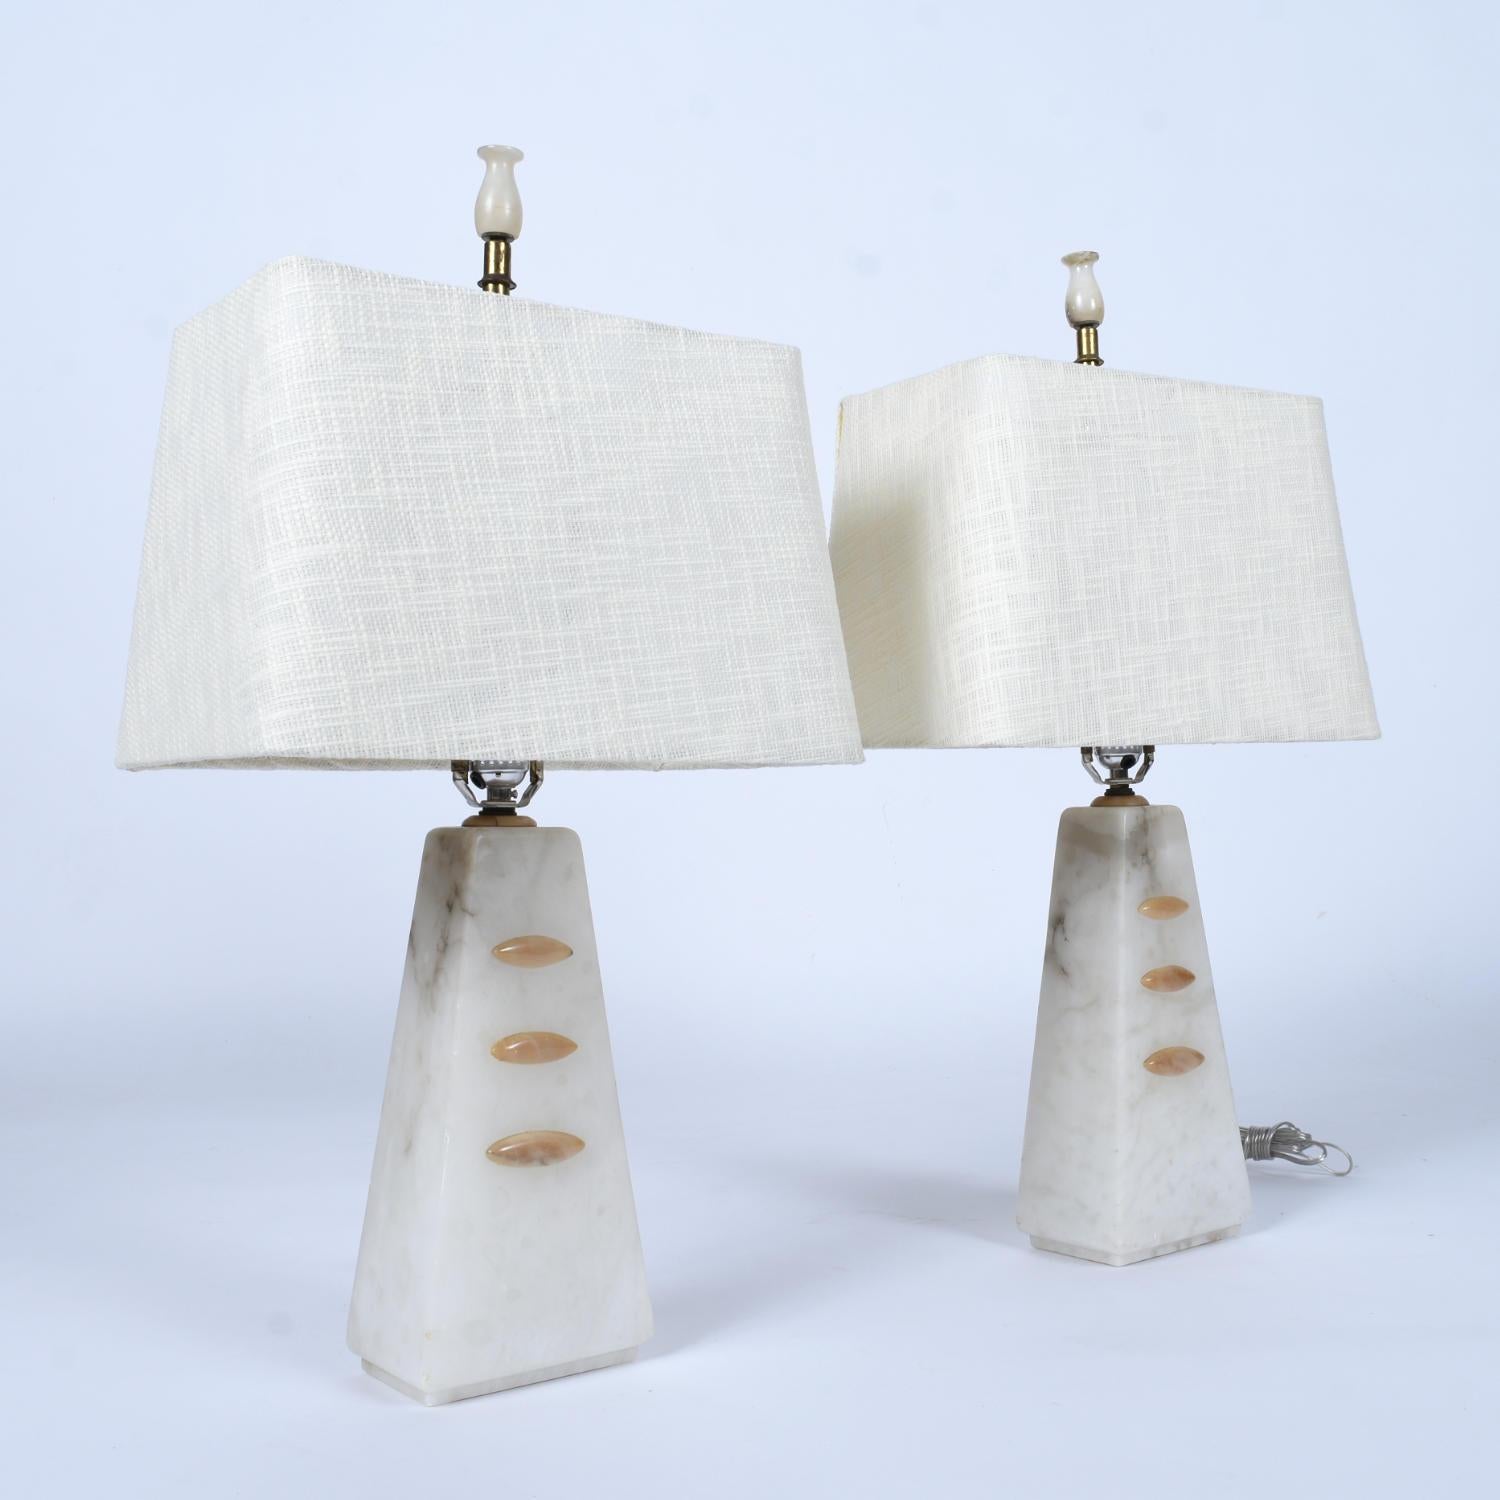 Mid-20th Century Alabaster Pyramid Table Lamps and Finials, Art Deco to Modern Transitional Style For Sale